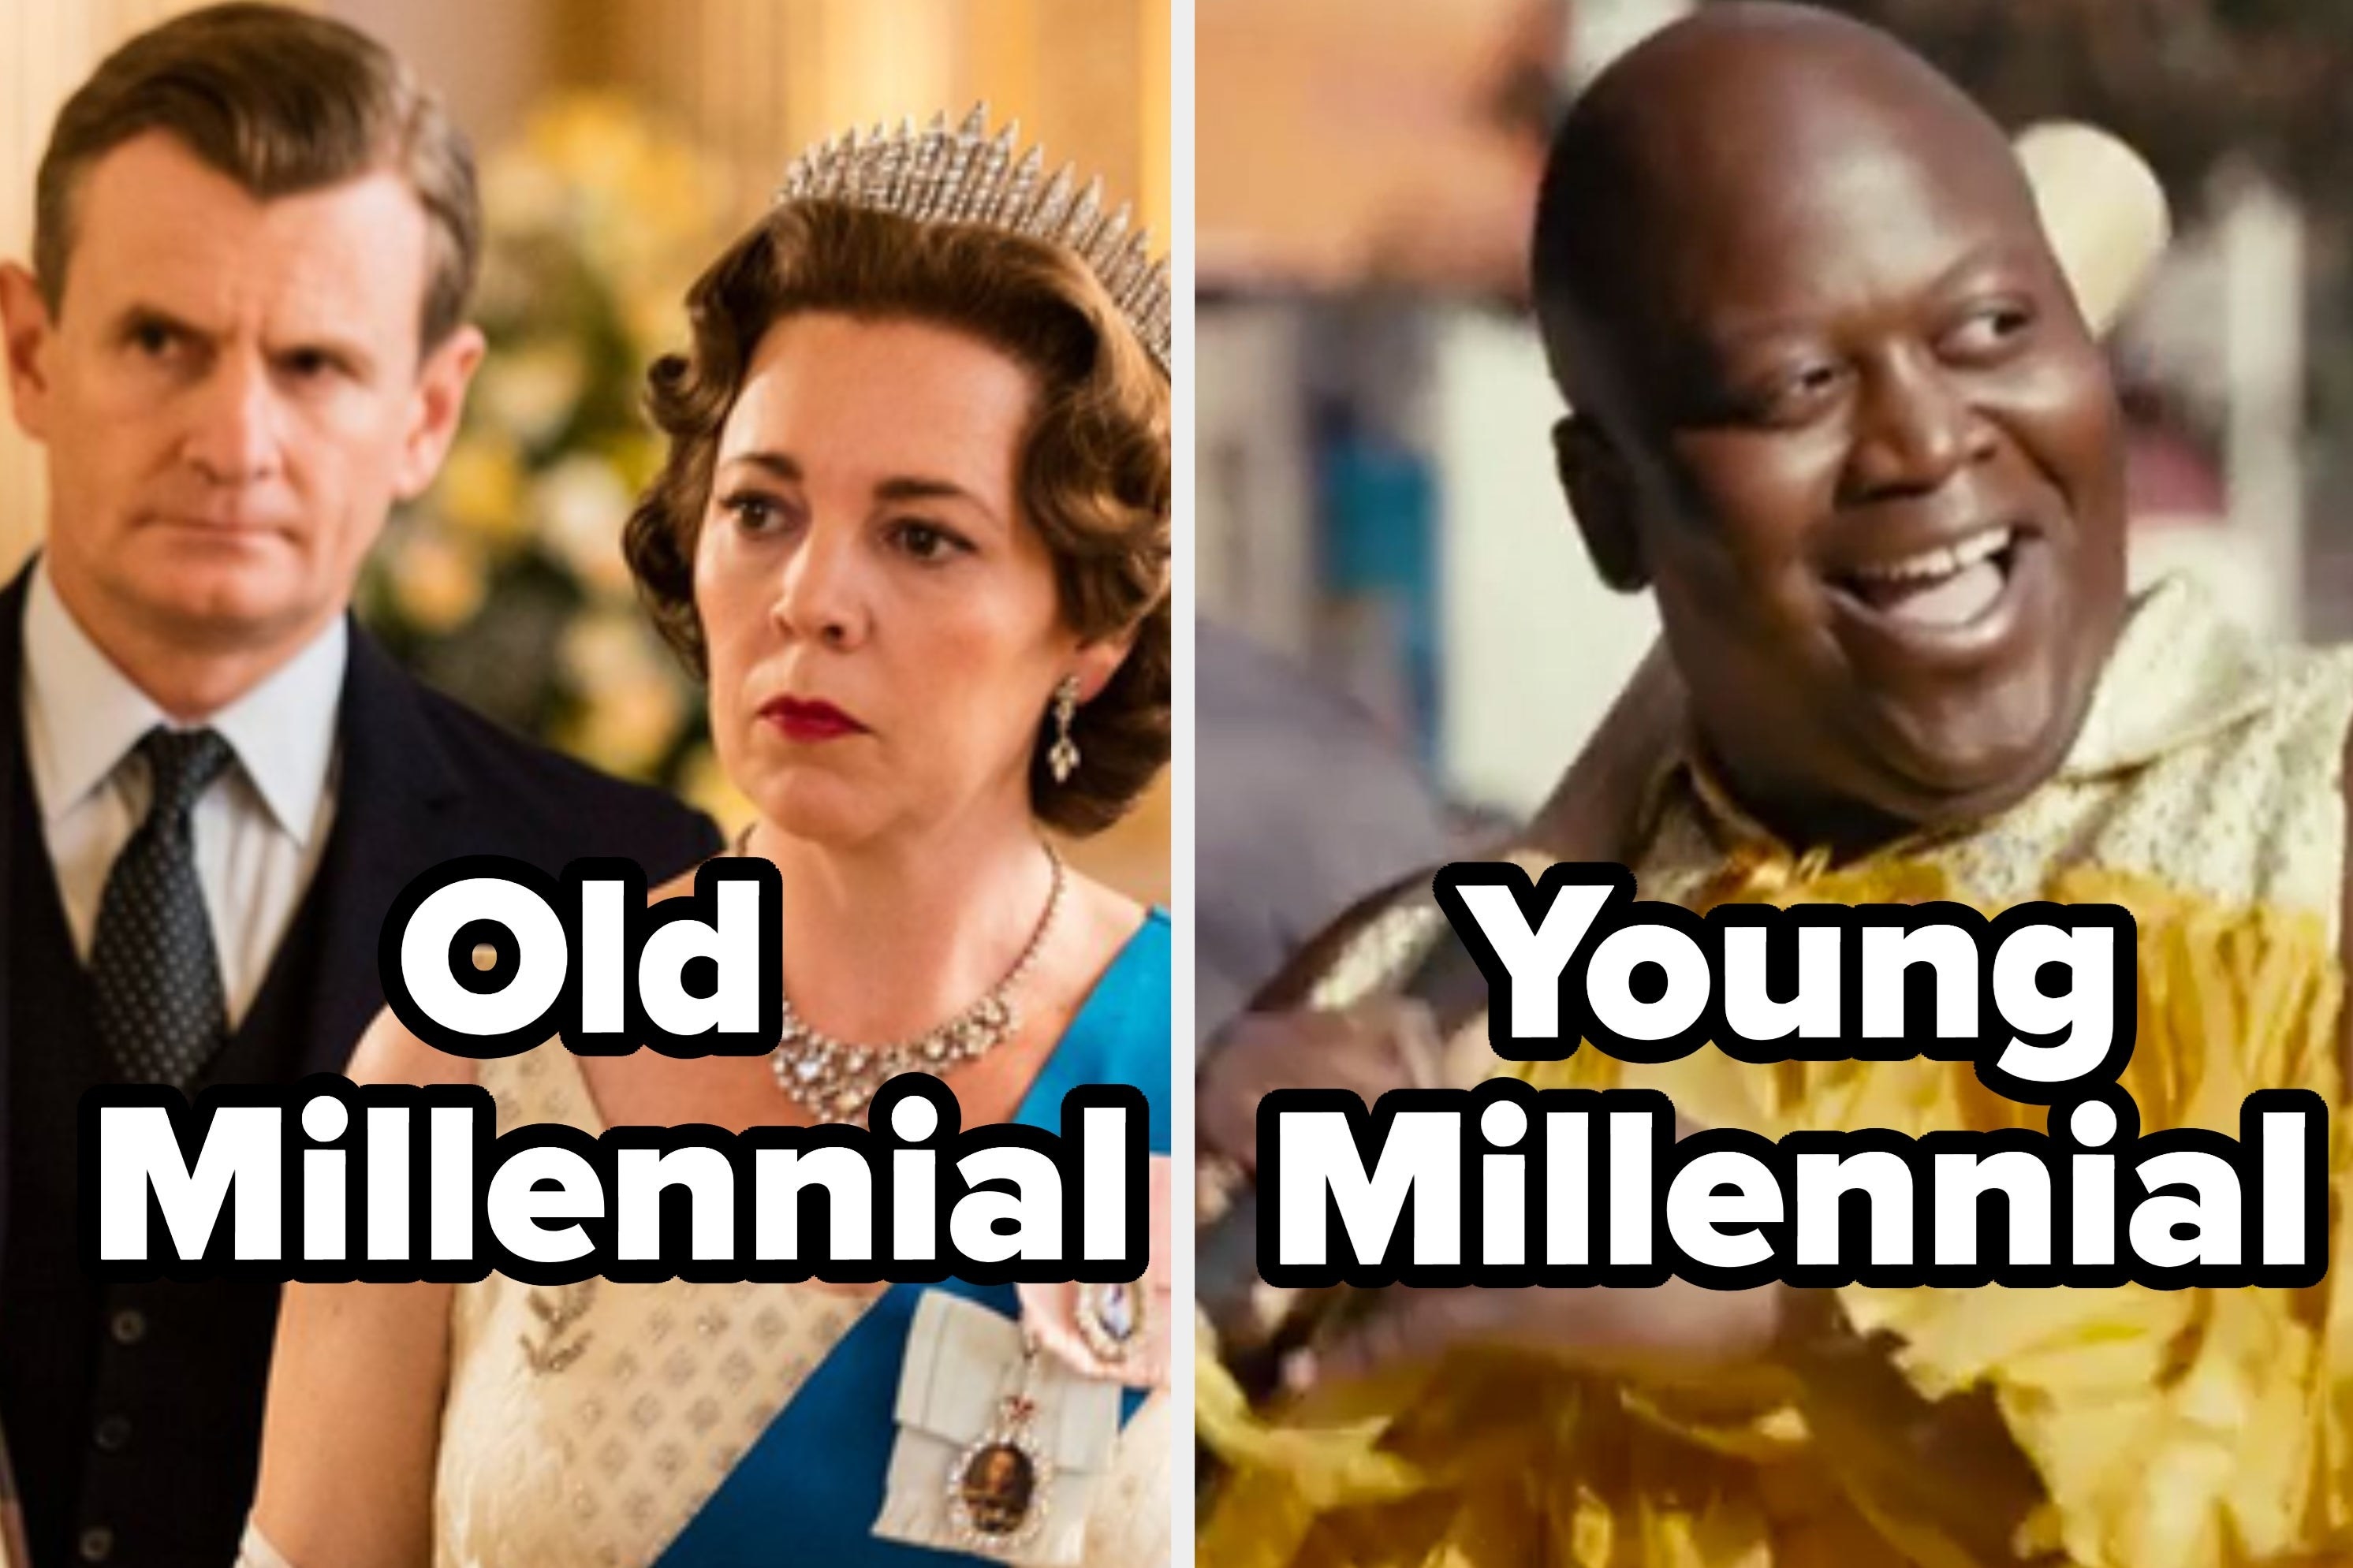 Queen Elizabeth II from &quot;The Crown&quot; with the words &quot;Old Millennial&quot; and Titus from &quot;Unbreakable Kimmy Schmidt&quot; with the words &quot;Young Millennial.&quot;